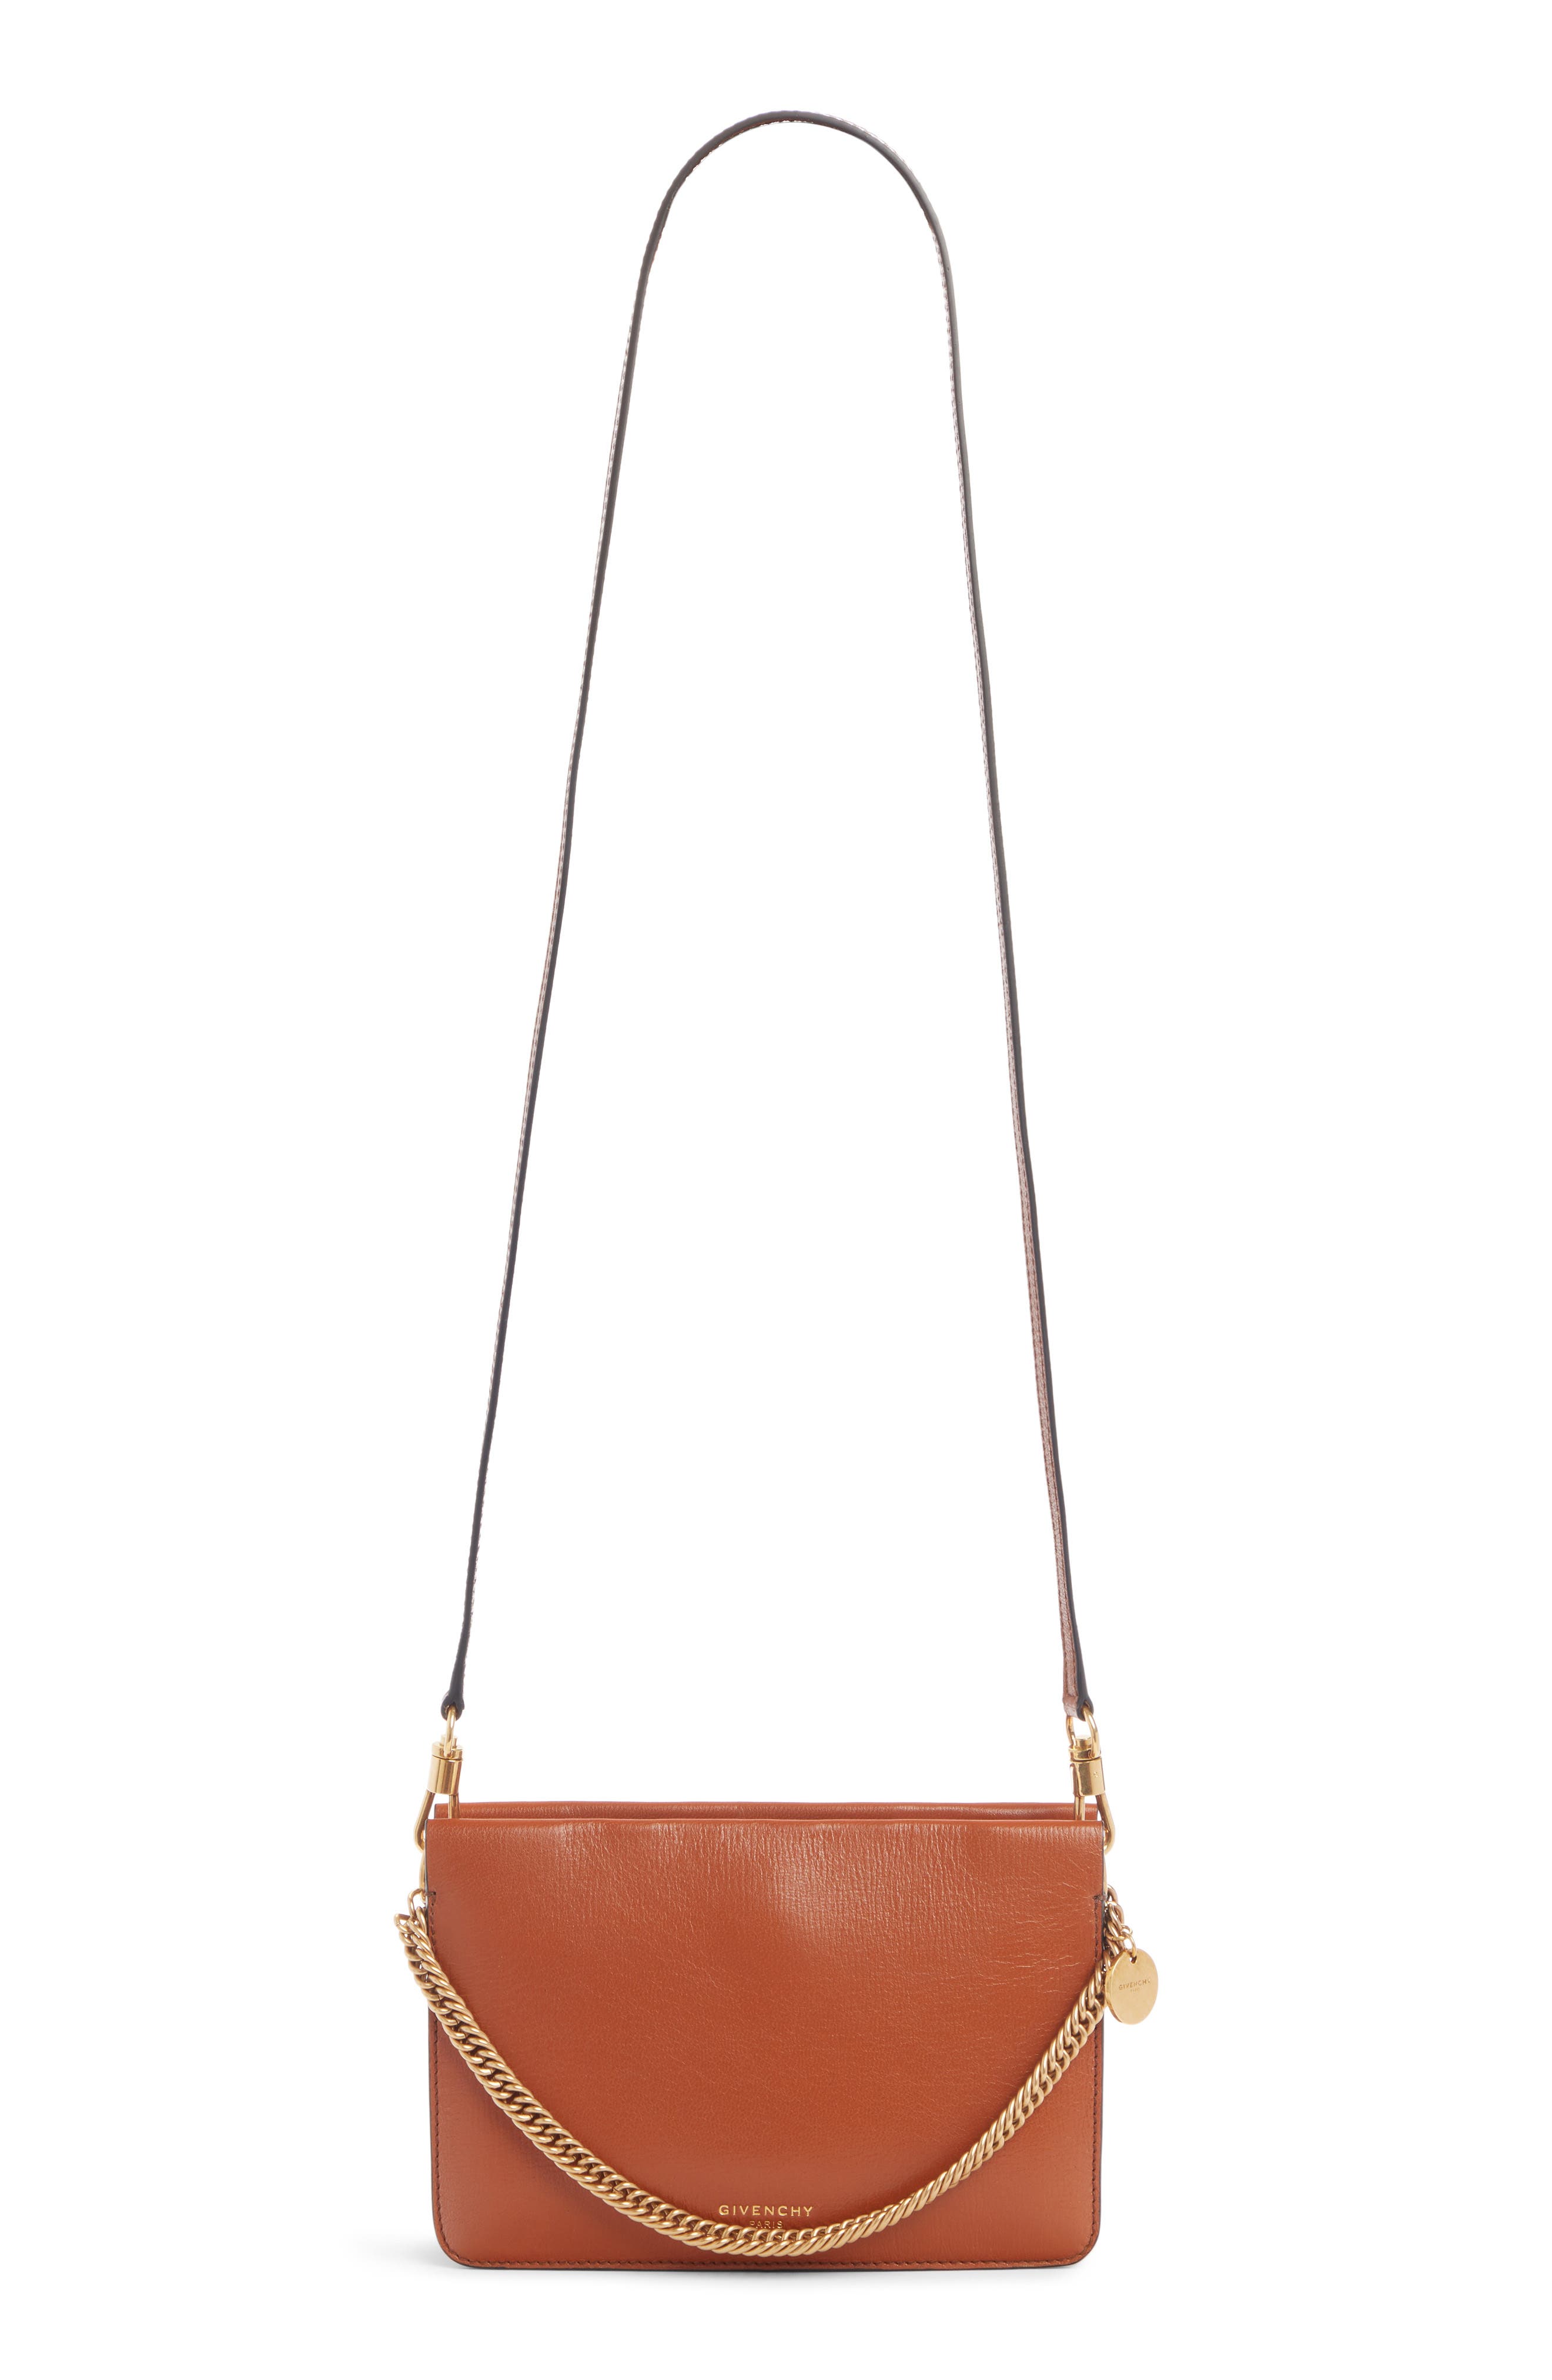 givenchy triple leather crossbody bag